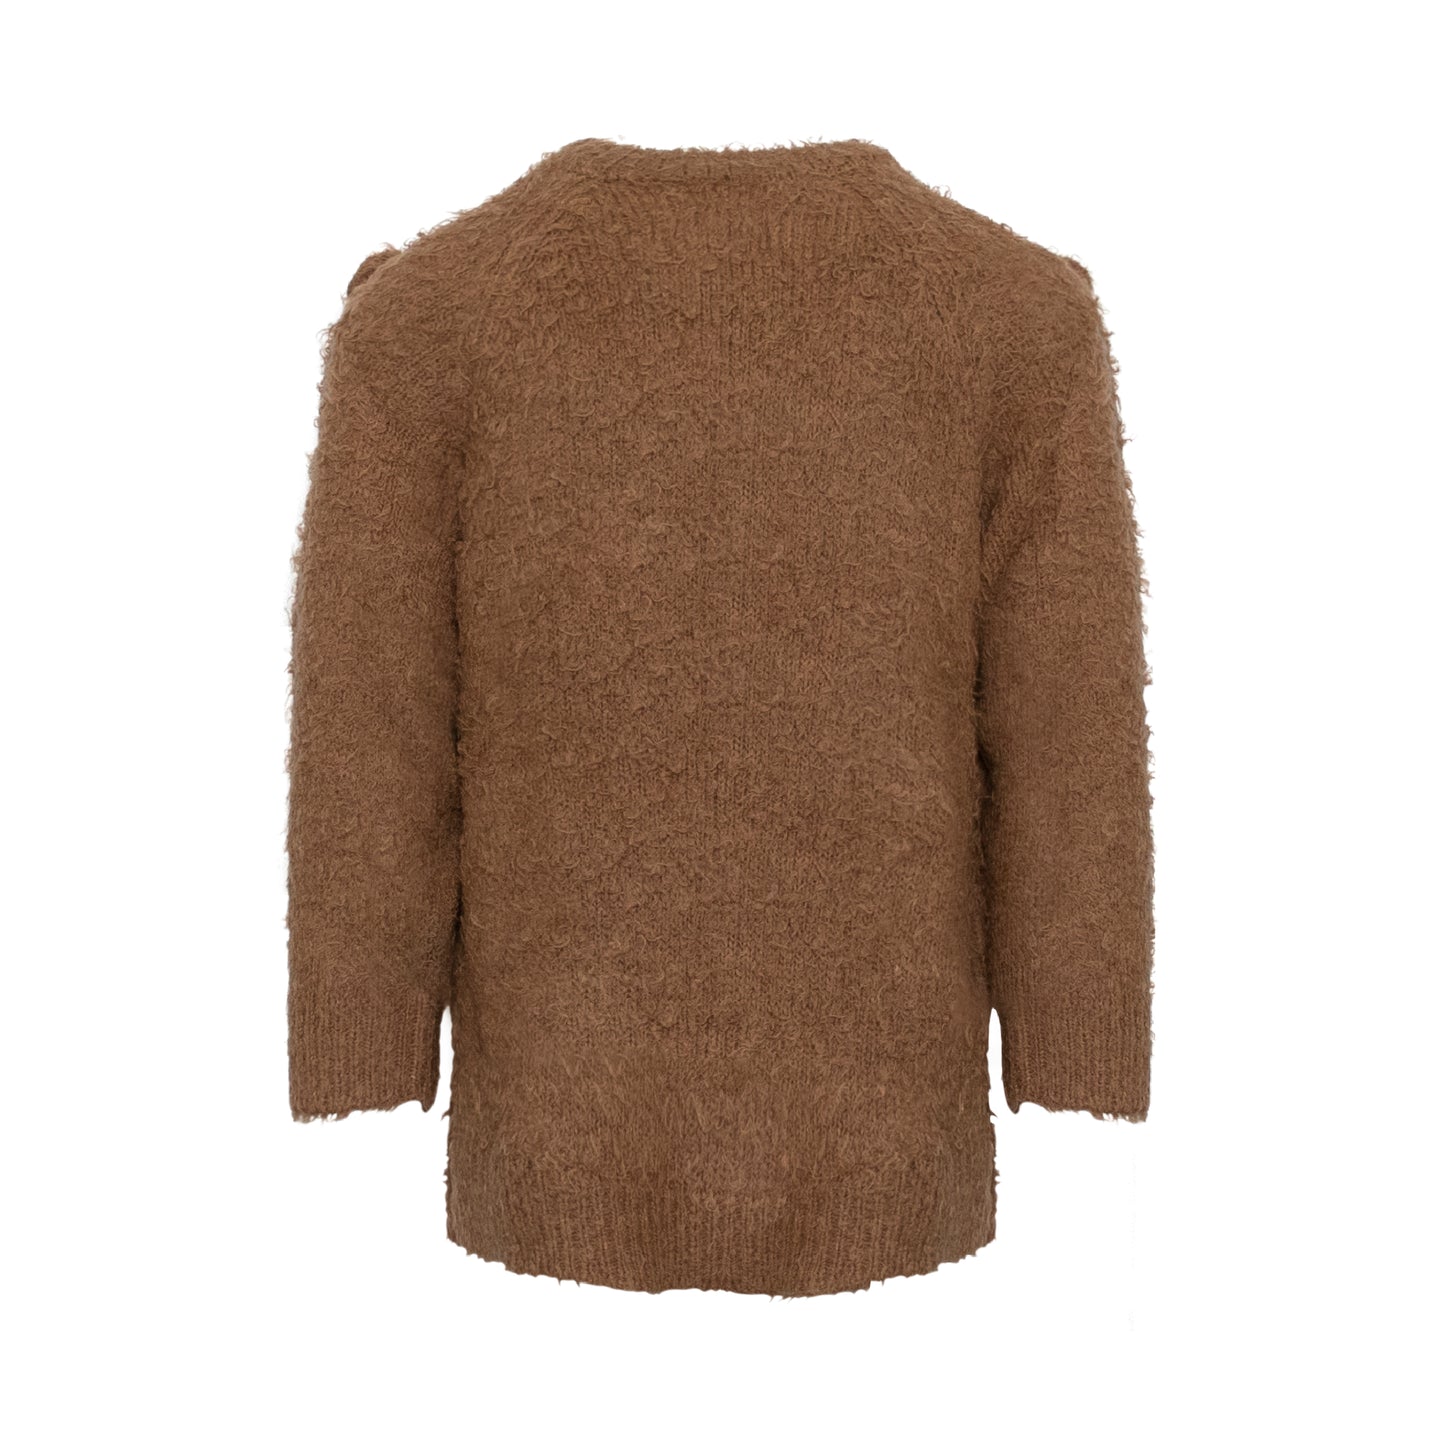 Camel Embroidery Knit Sweater in Camel